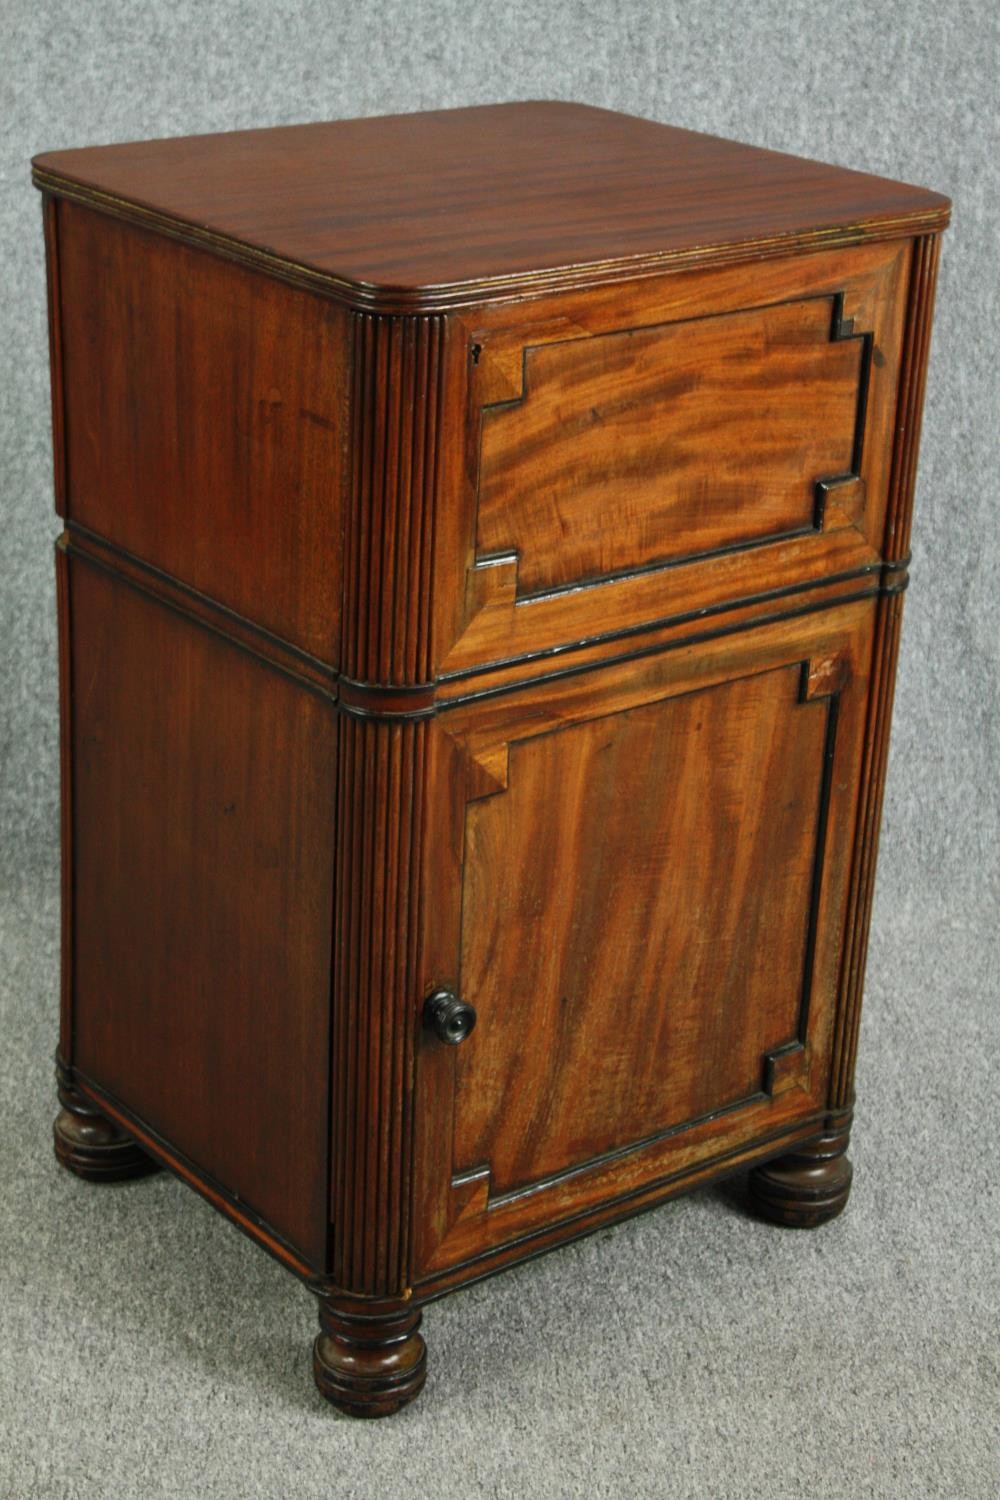 Pedestal cabinet, early 19th century flame mahogany. H.87 W.54 D.47cm. - Image 3 of 6